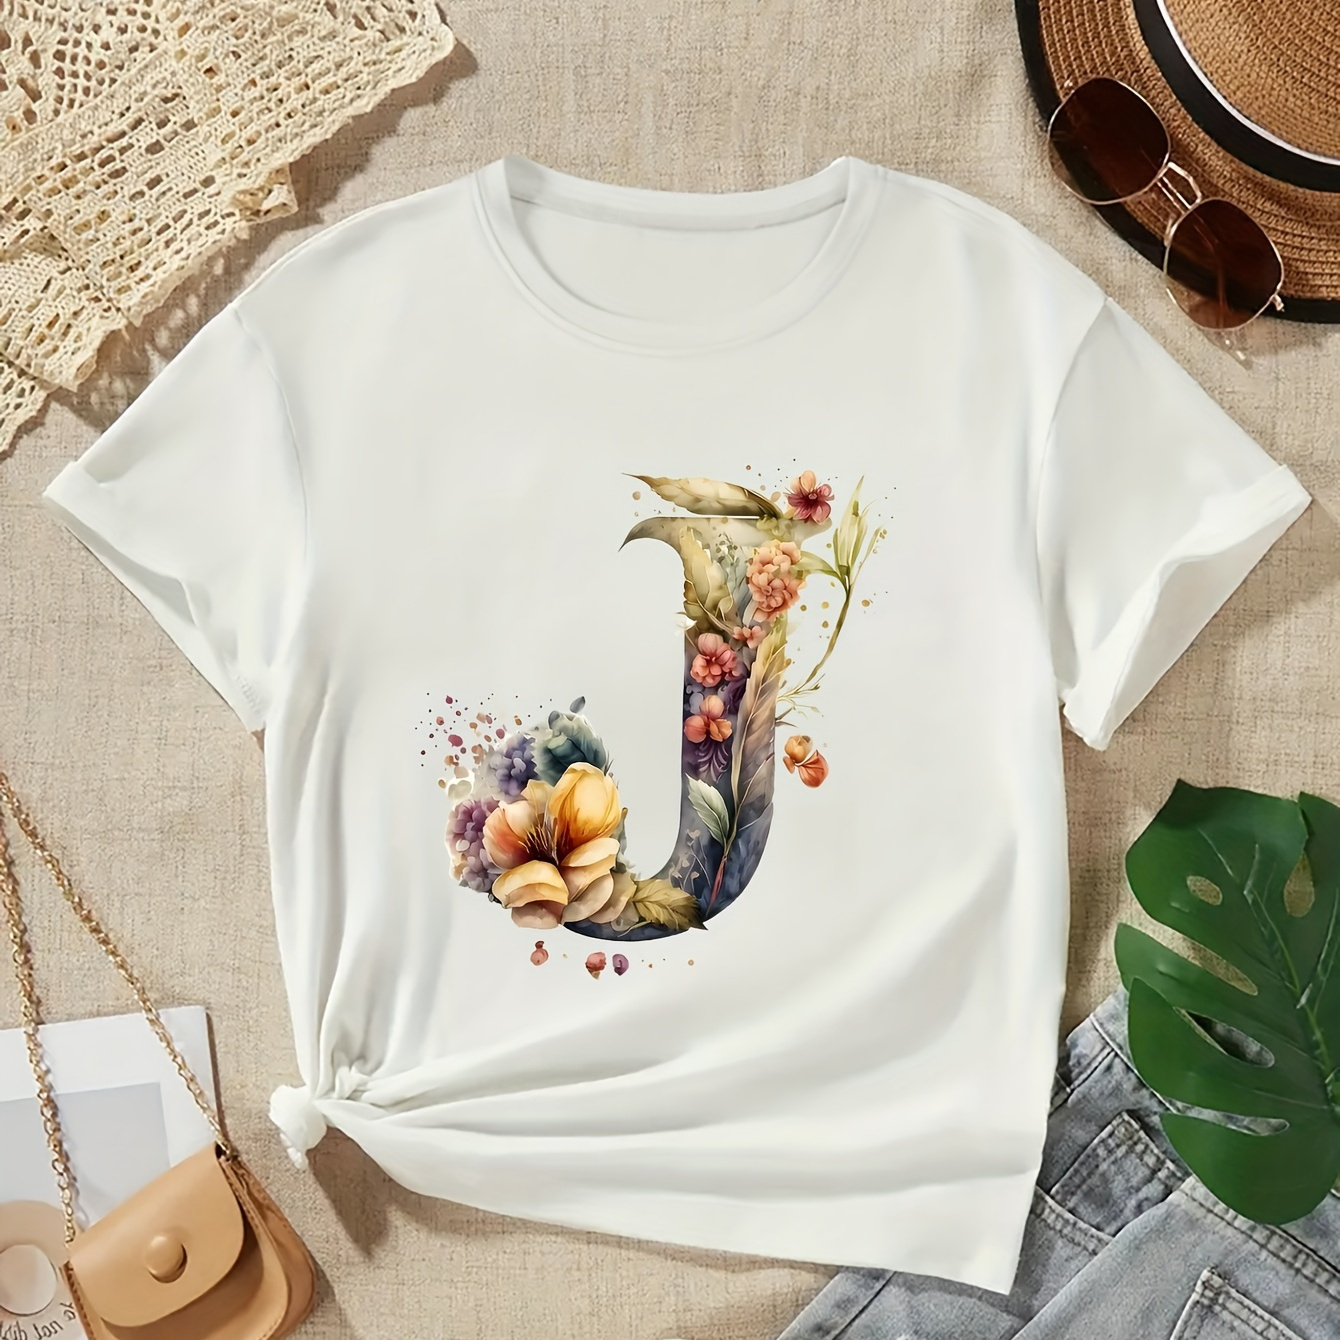 

Letter-j Print Creative T-shirts, Soft & Elastic Comfy Crew Neck Short Sleeve Tee, Girls' Daily Wear Top